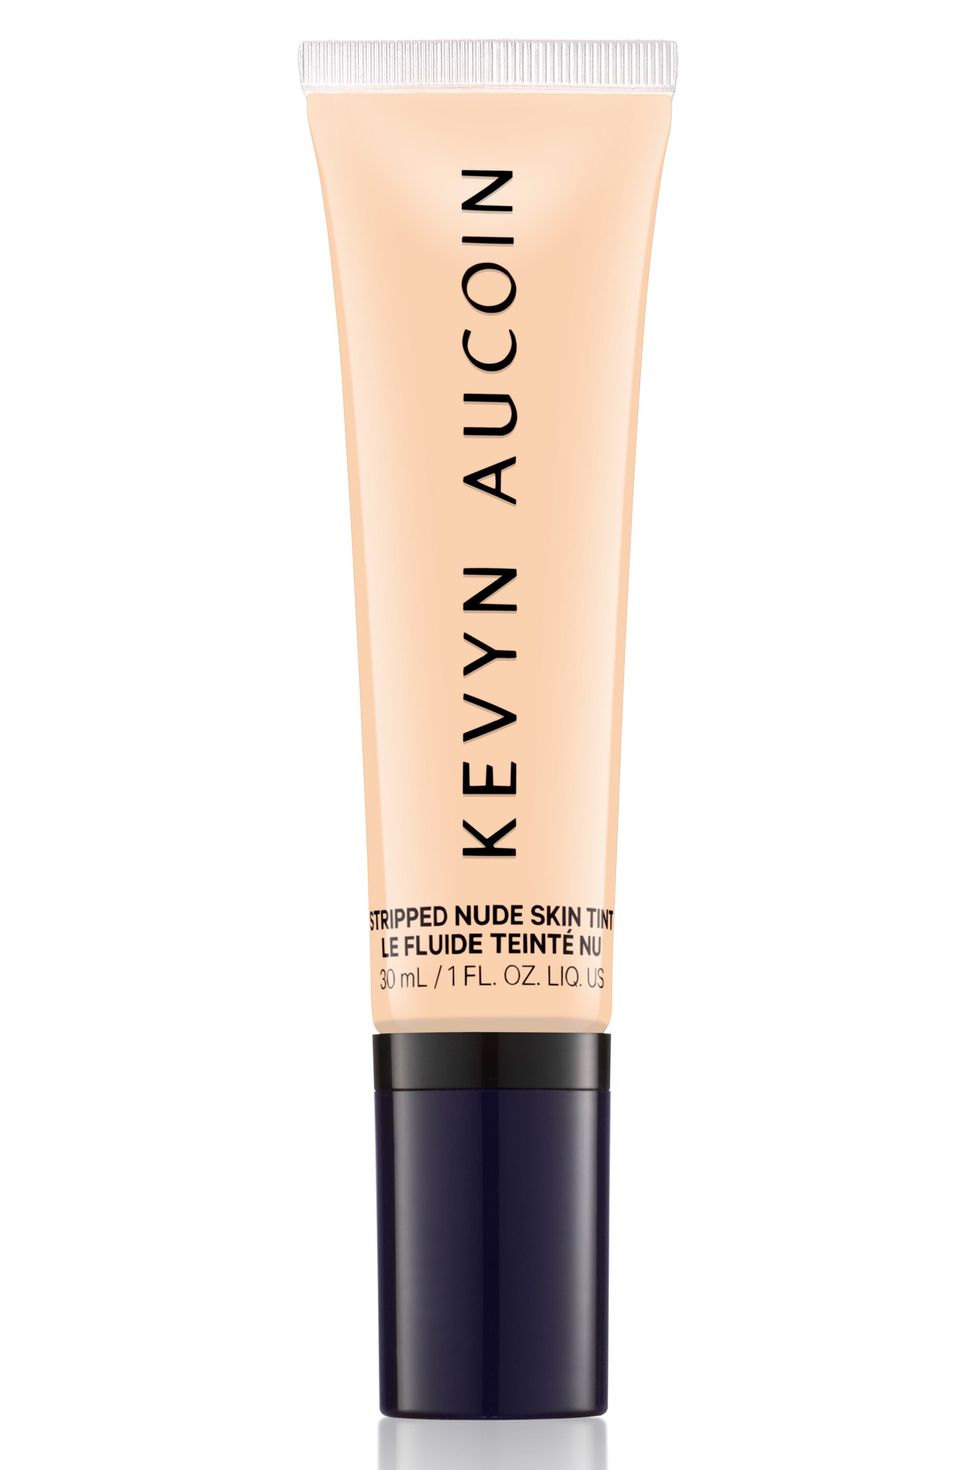 Kevyn Aucoin Beauty Stripped Nude Skin Tint